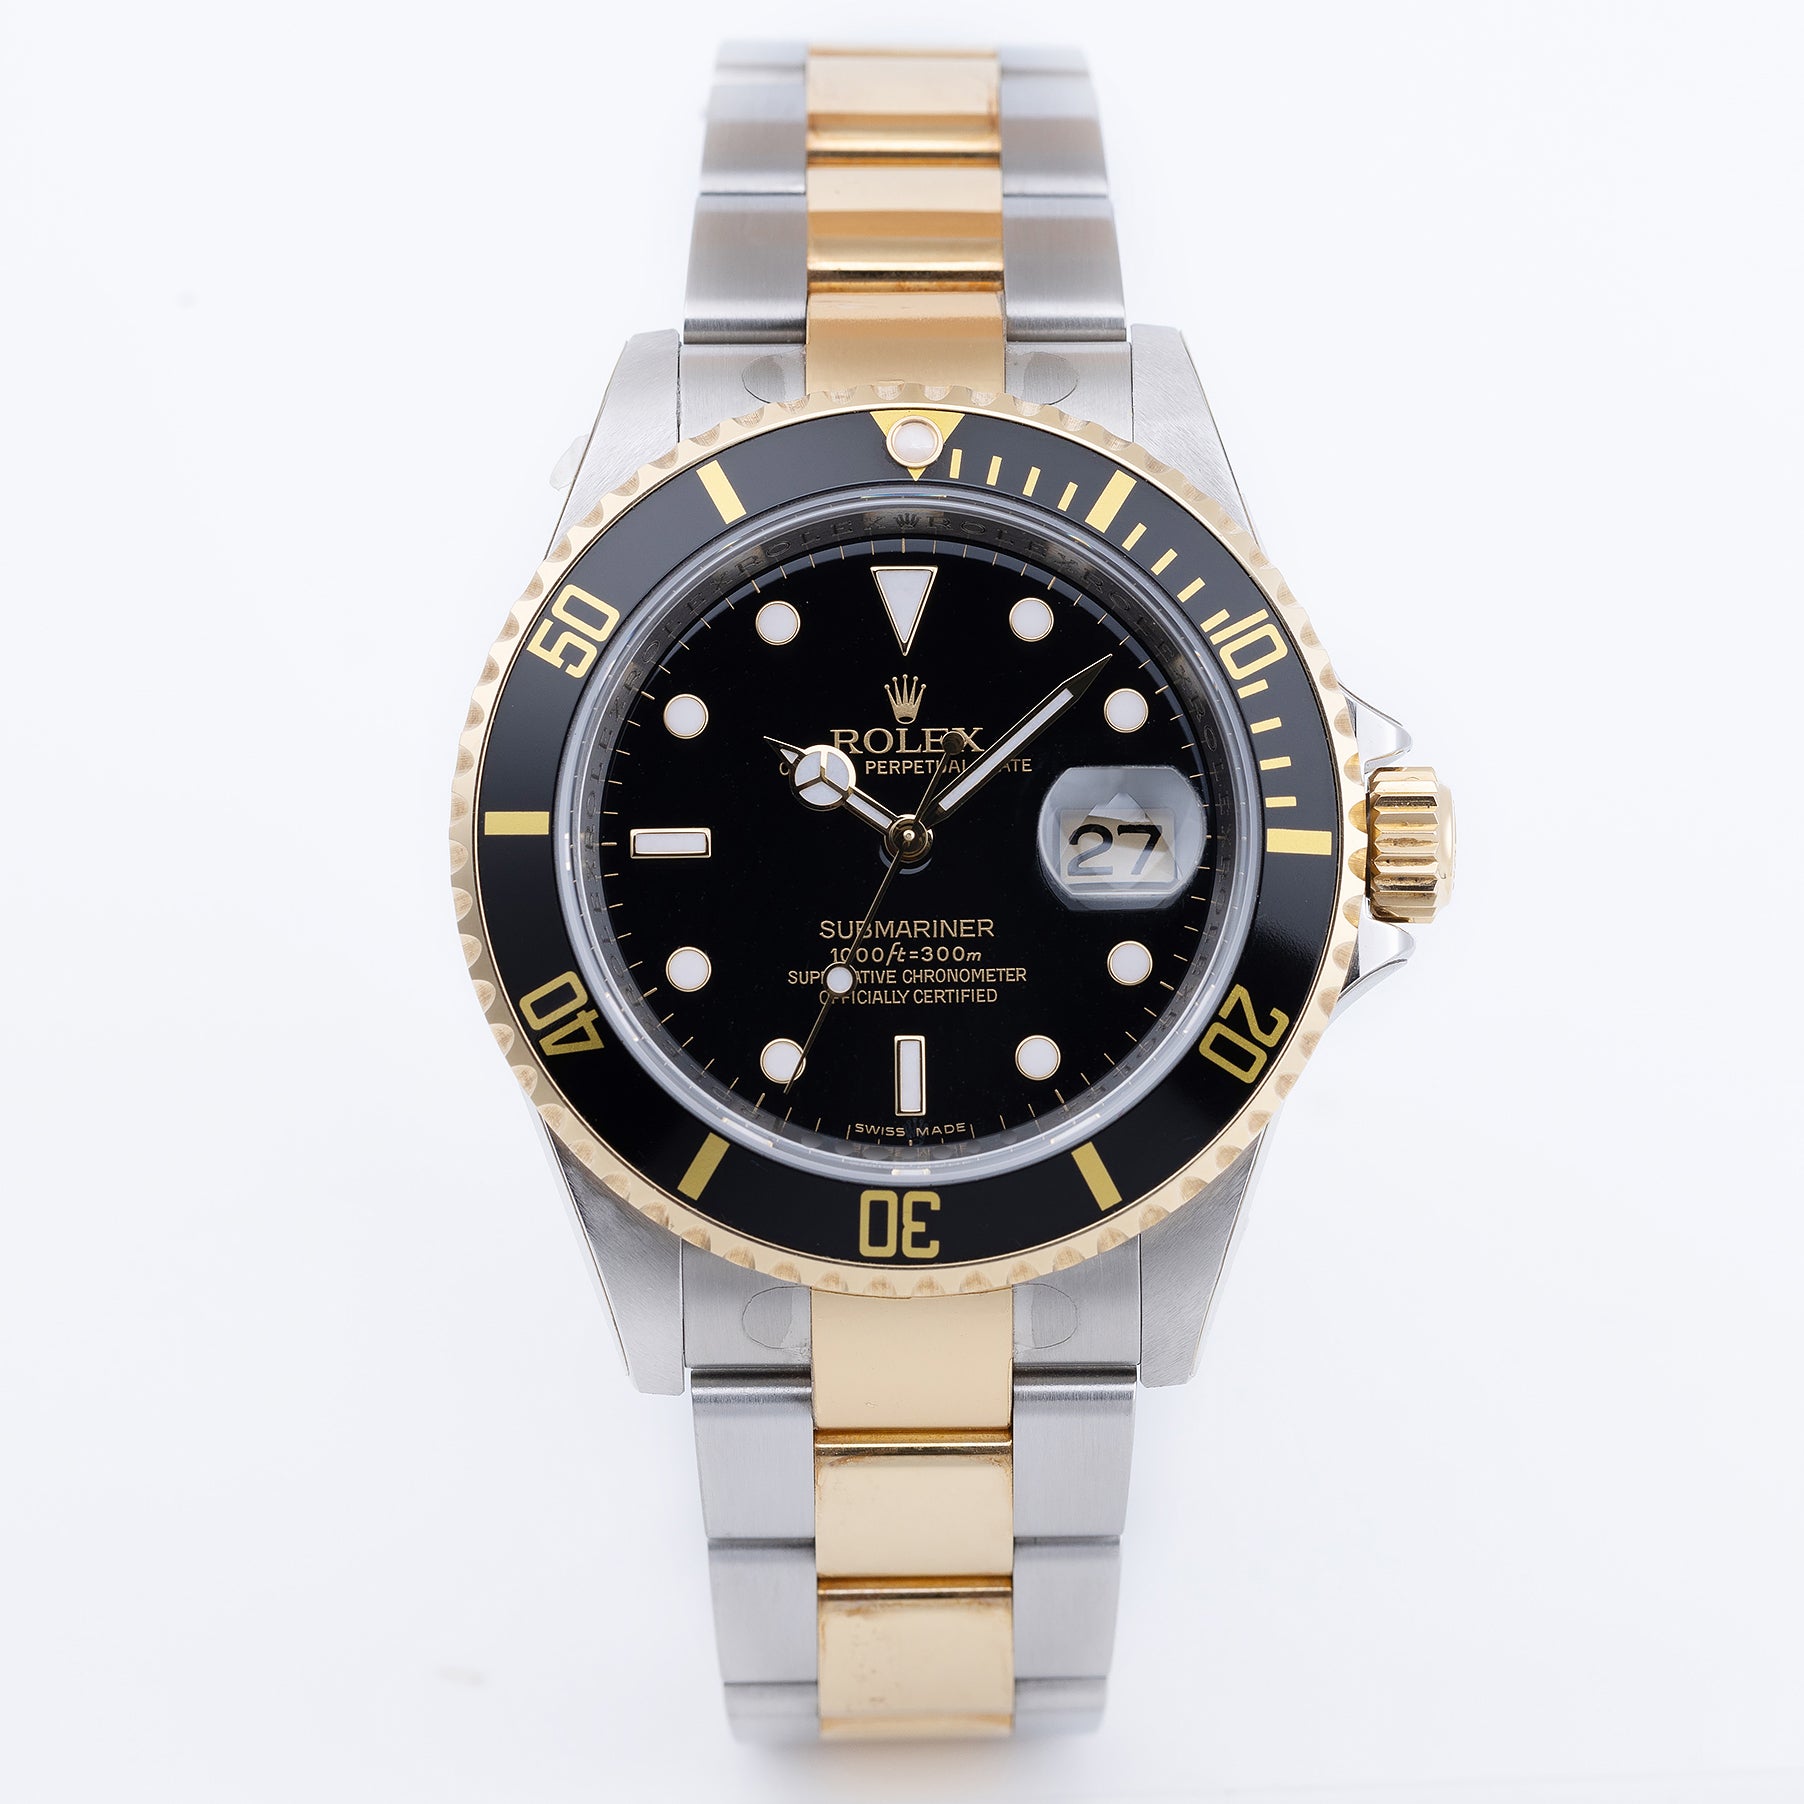 Rolex Submariner NOS | Ref. 16613LN | Black Dial | Box & Papers | 2011 | Stainless Steel & 18K Yellow Gold